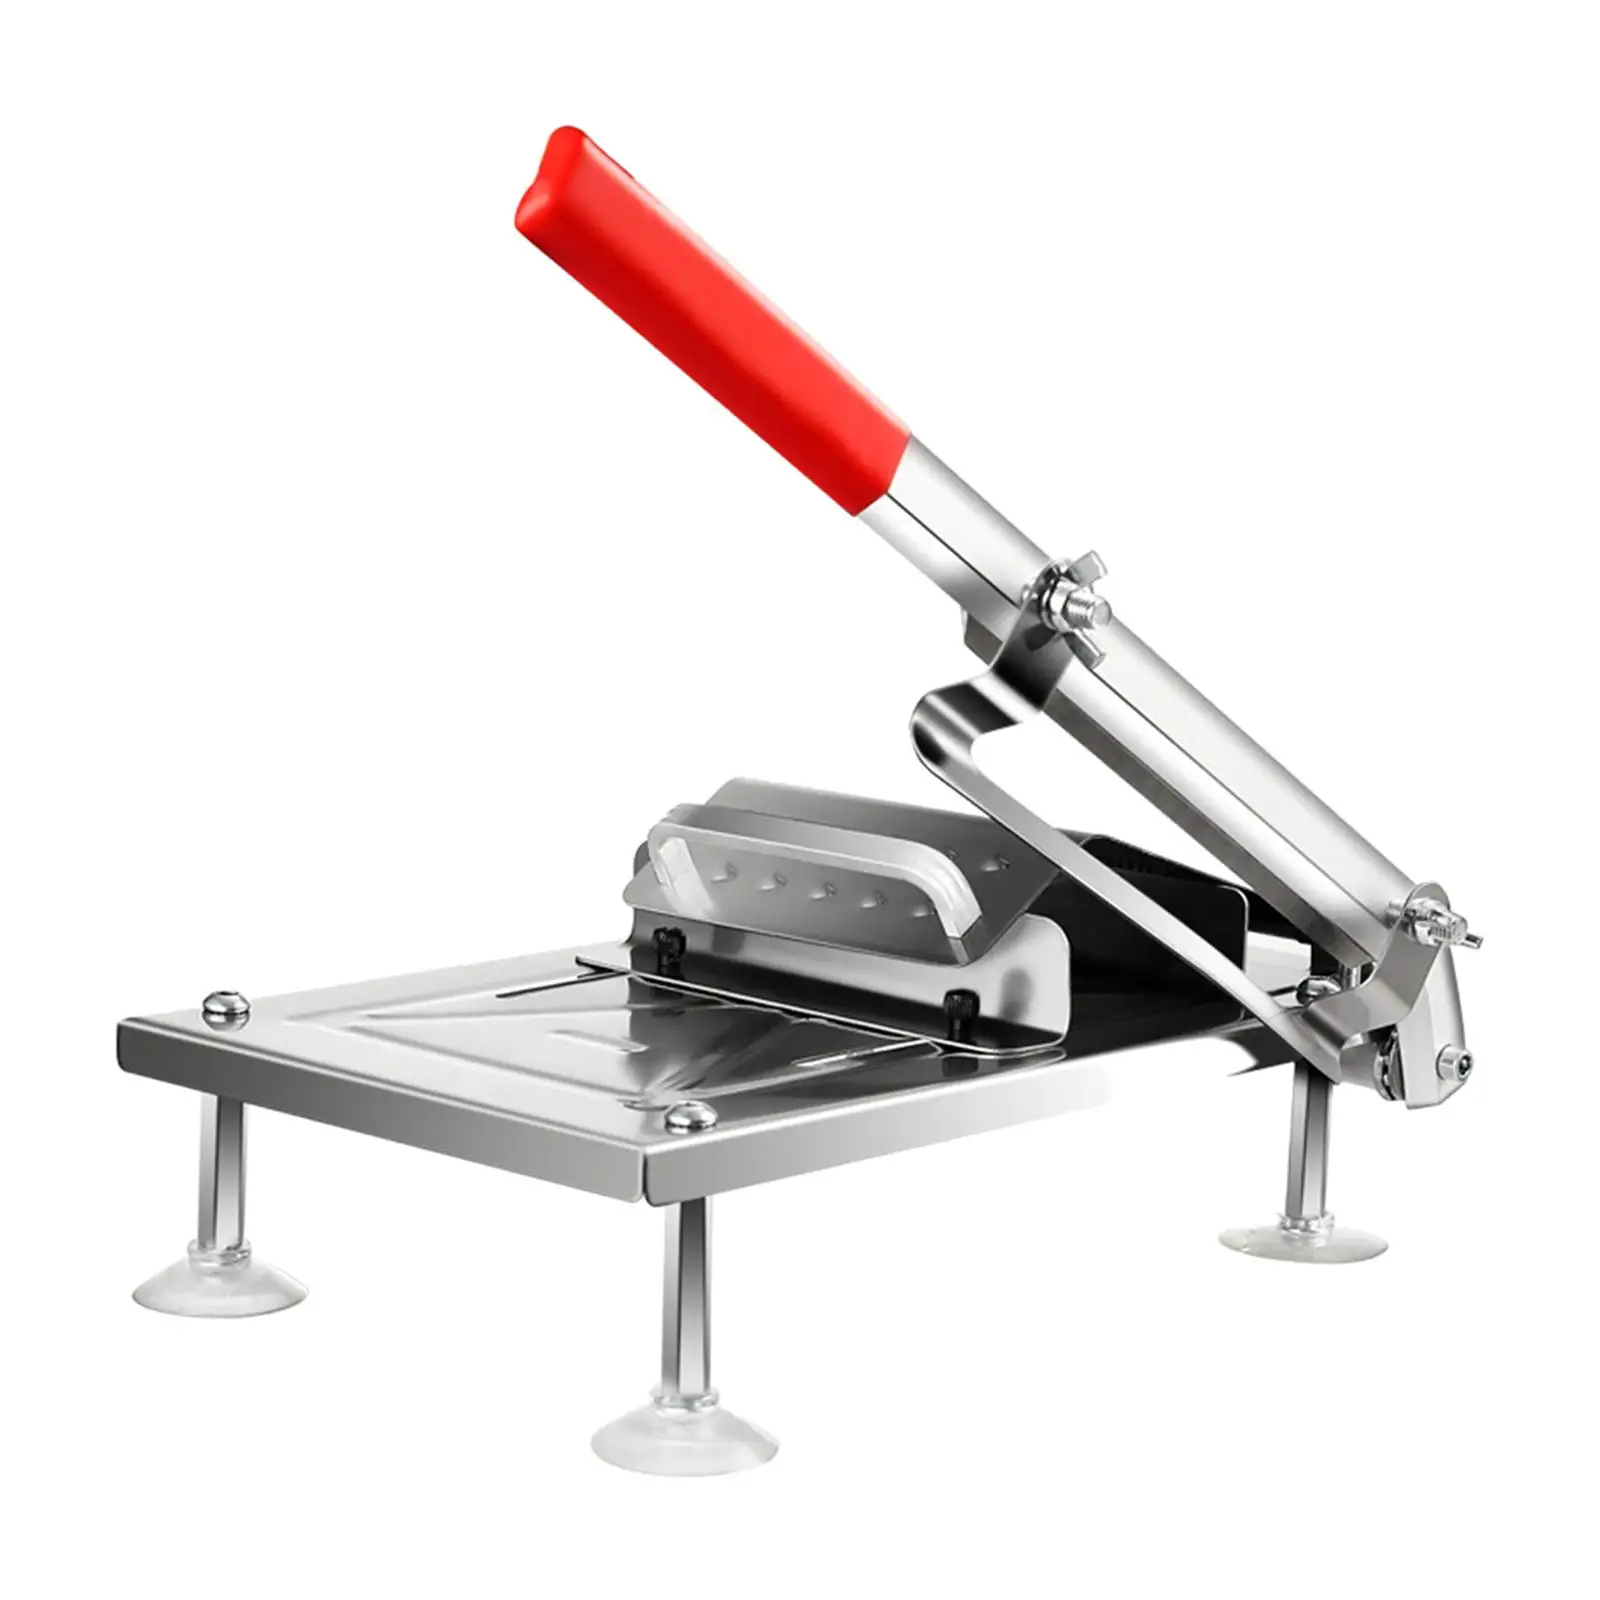 Manual Frozen Meat Slicer Vegetable Sheet Slicing Multifunctional Roll Meat Cleavers Roll Slicing Cleavers for Fruits Hotpot BBQ